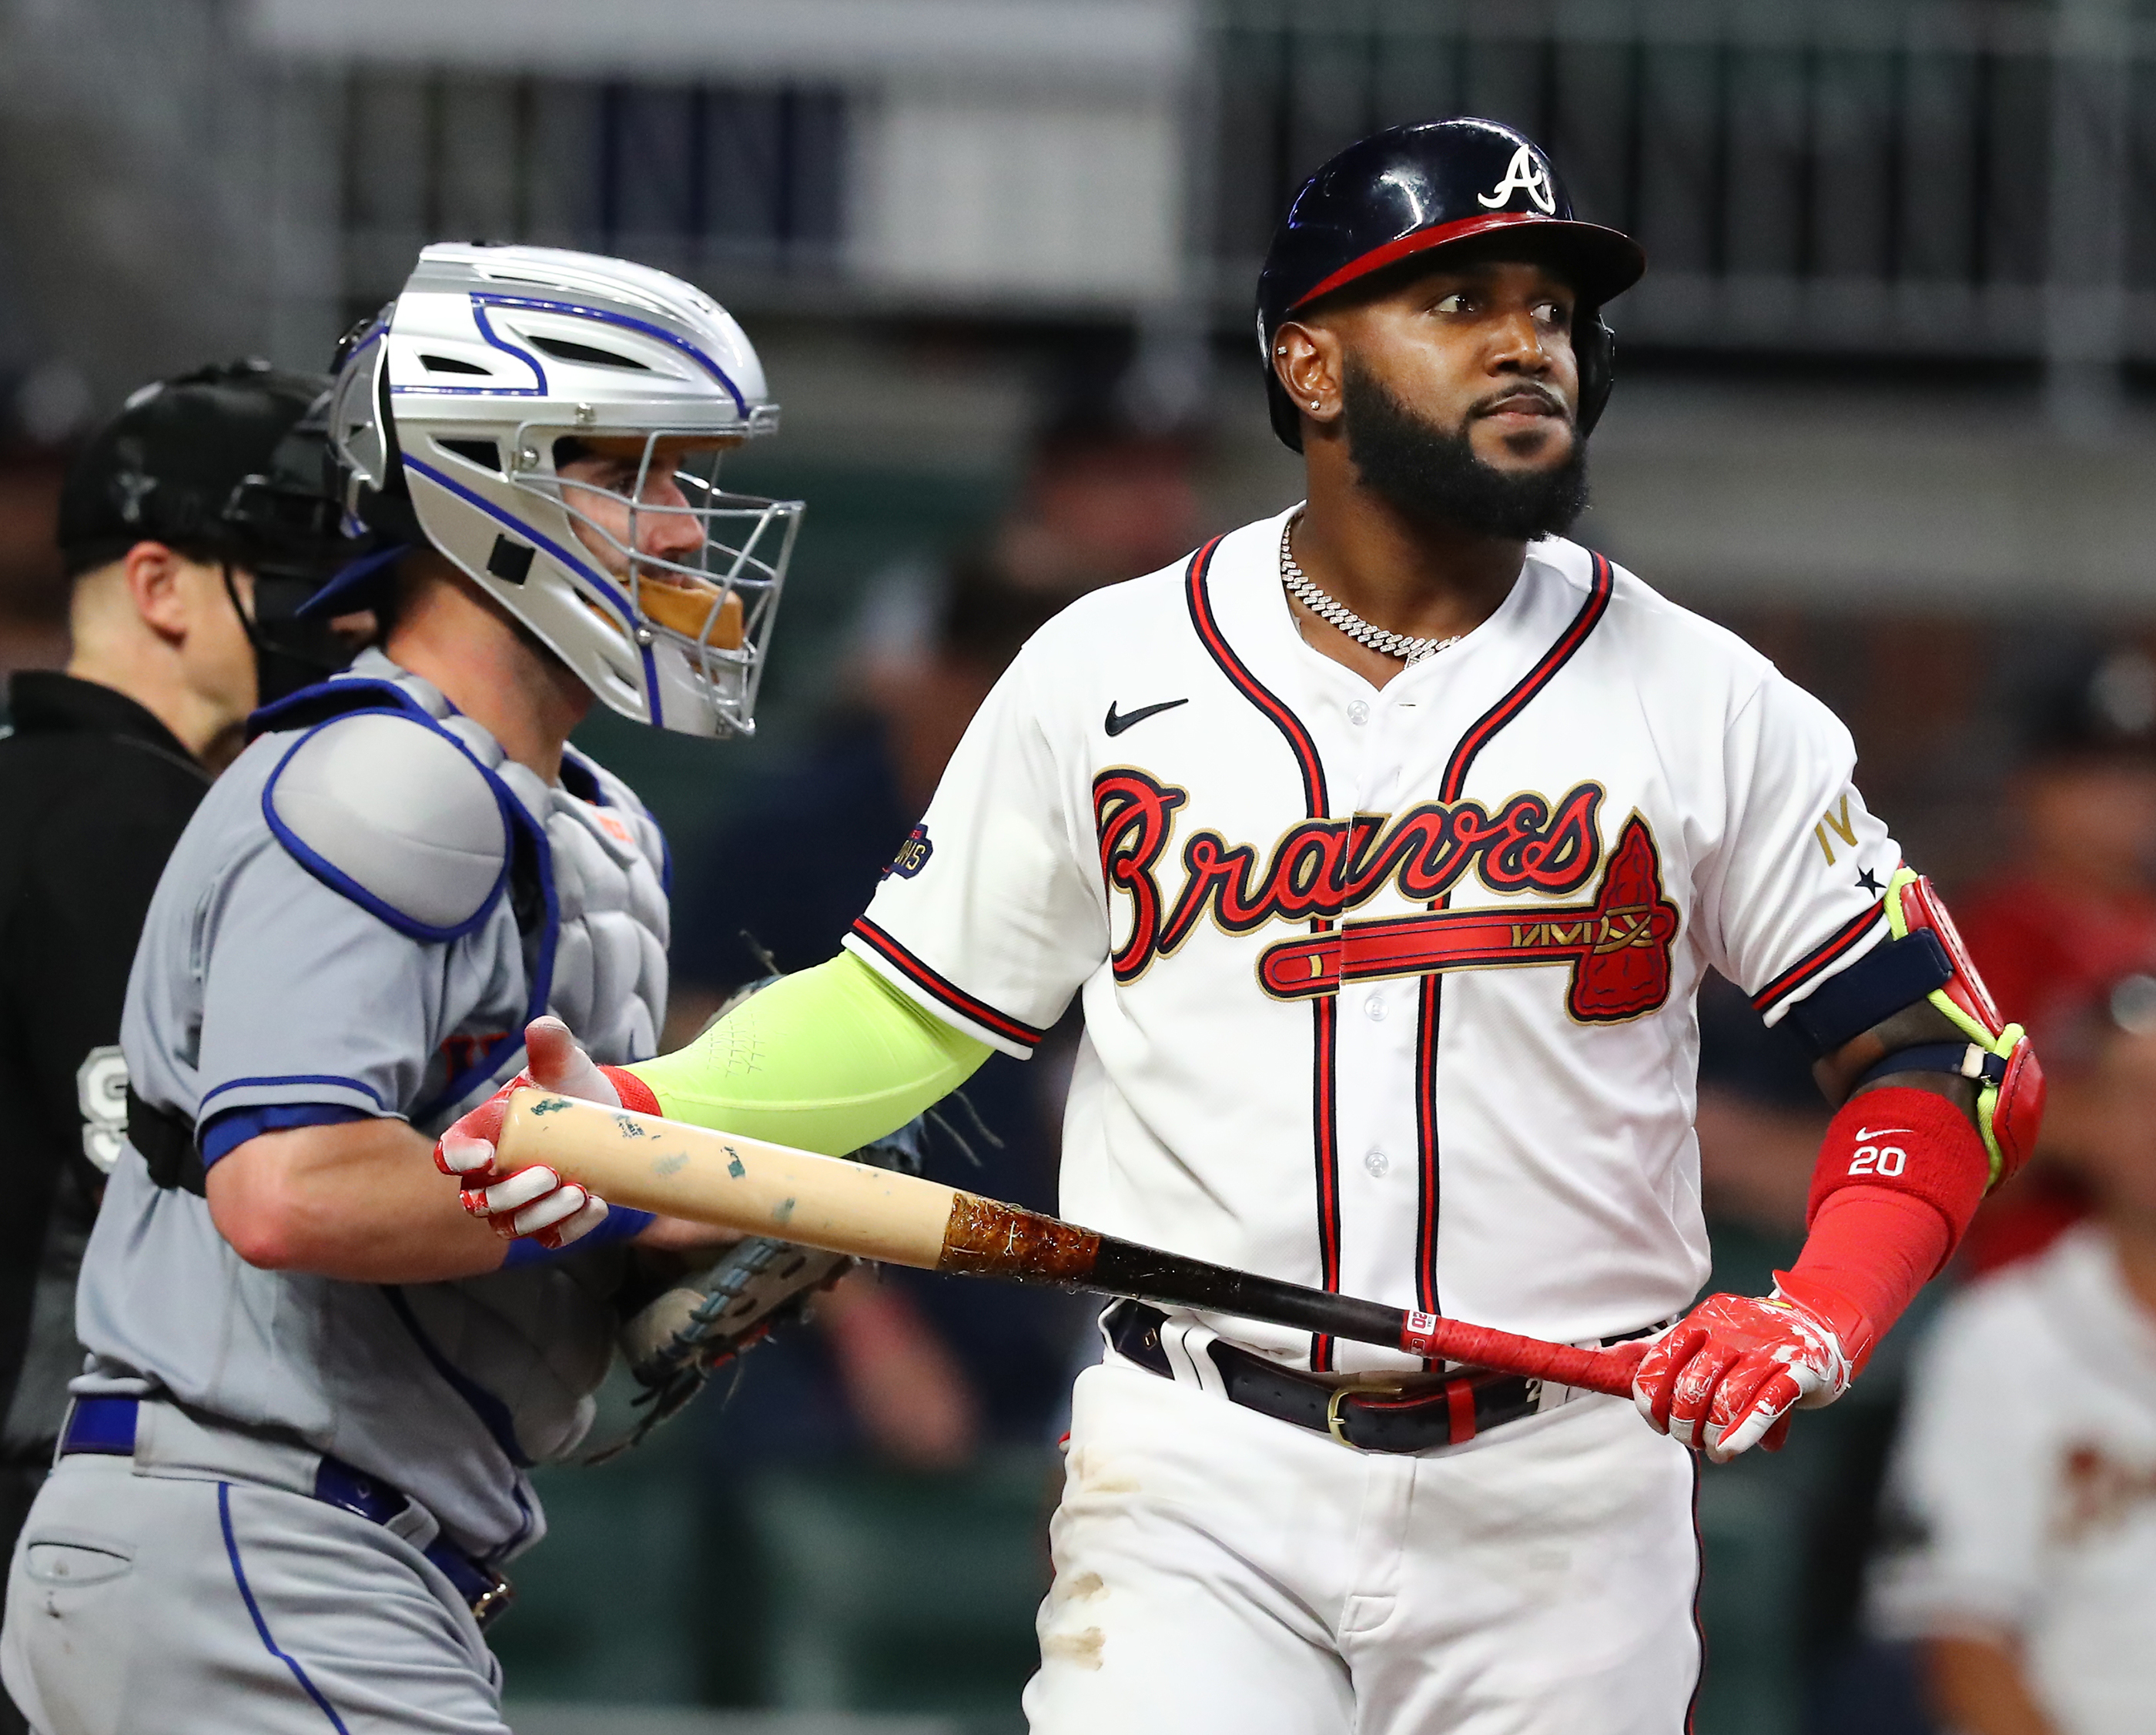 Braves: Marcell Ozuna comes to an agreement with prosecutors